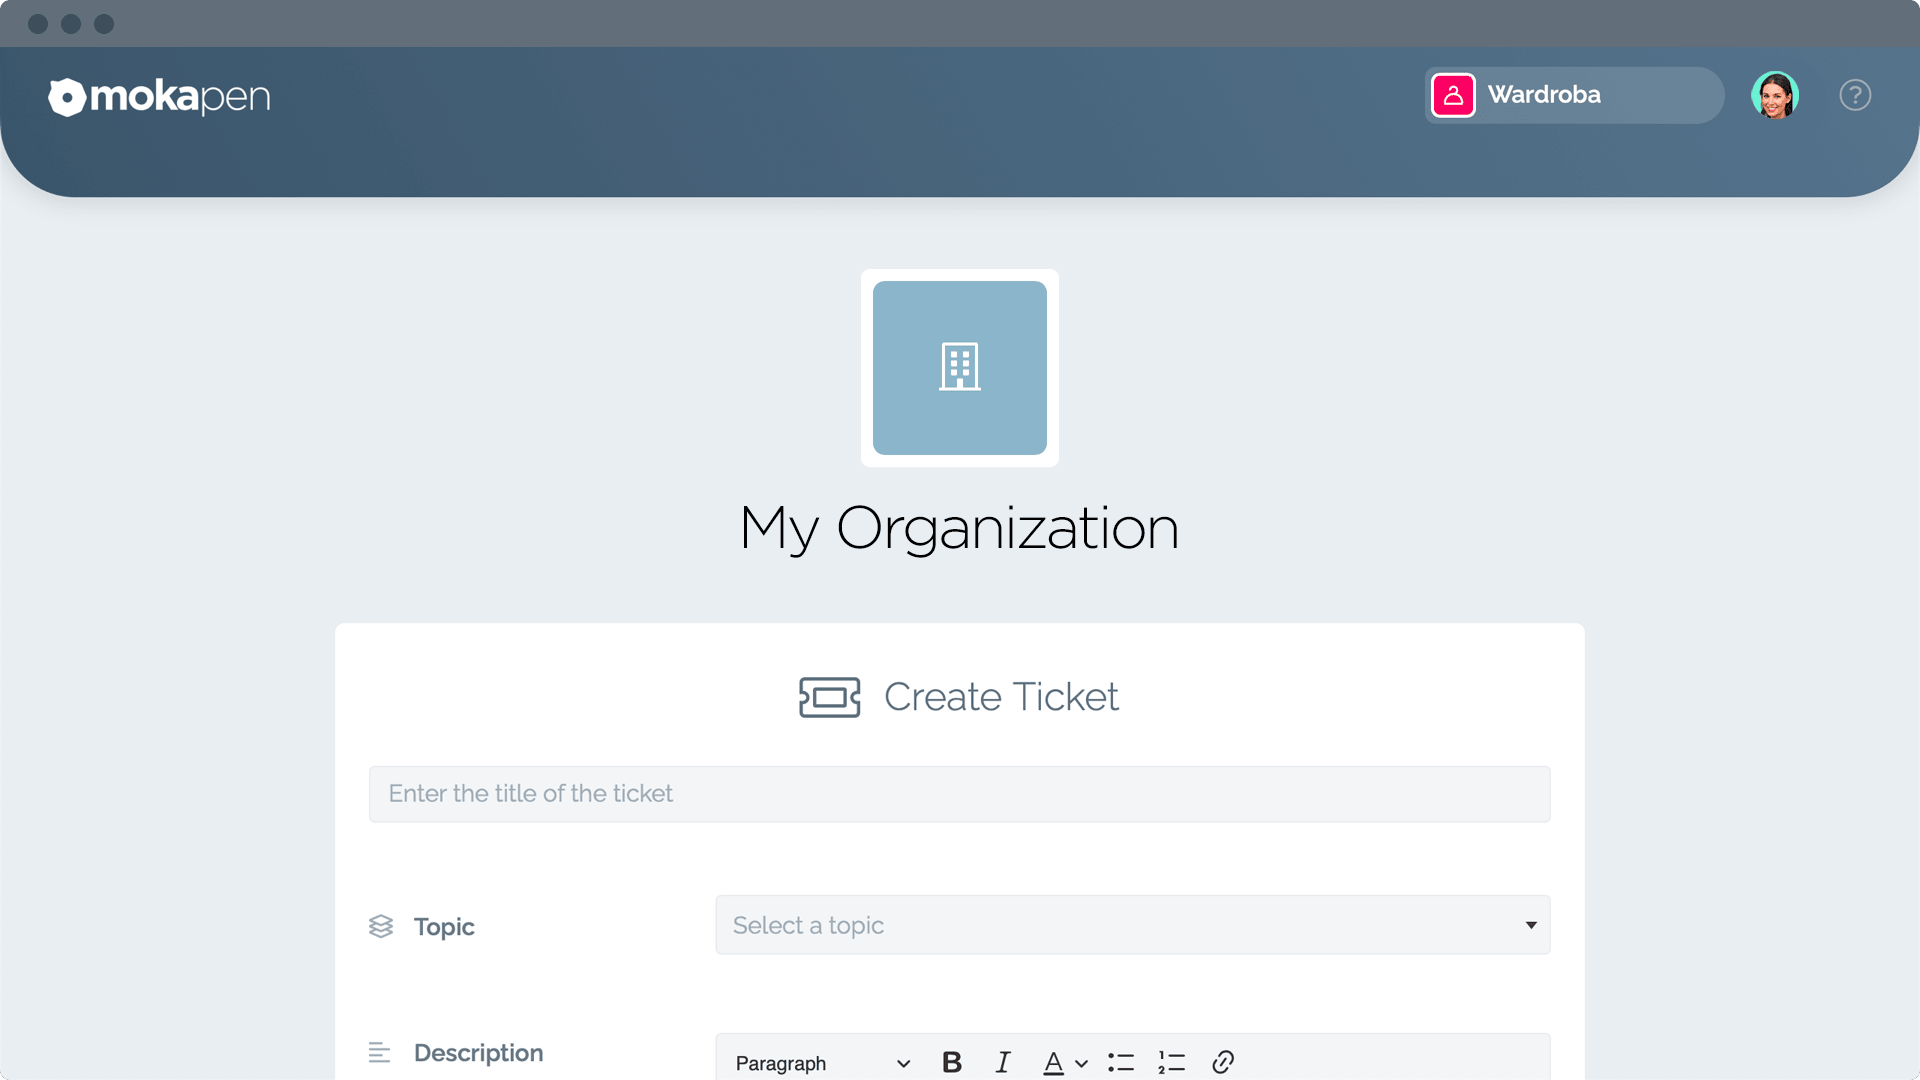 Exploit your external tickets landing page allowing your customers to open a support ticket to your organization. Getting customers' requests becomes automatic, tracked and organized.